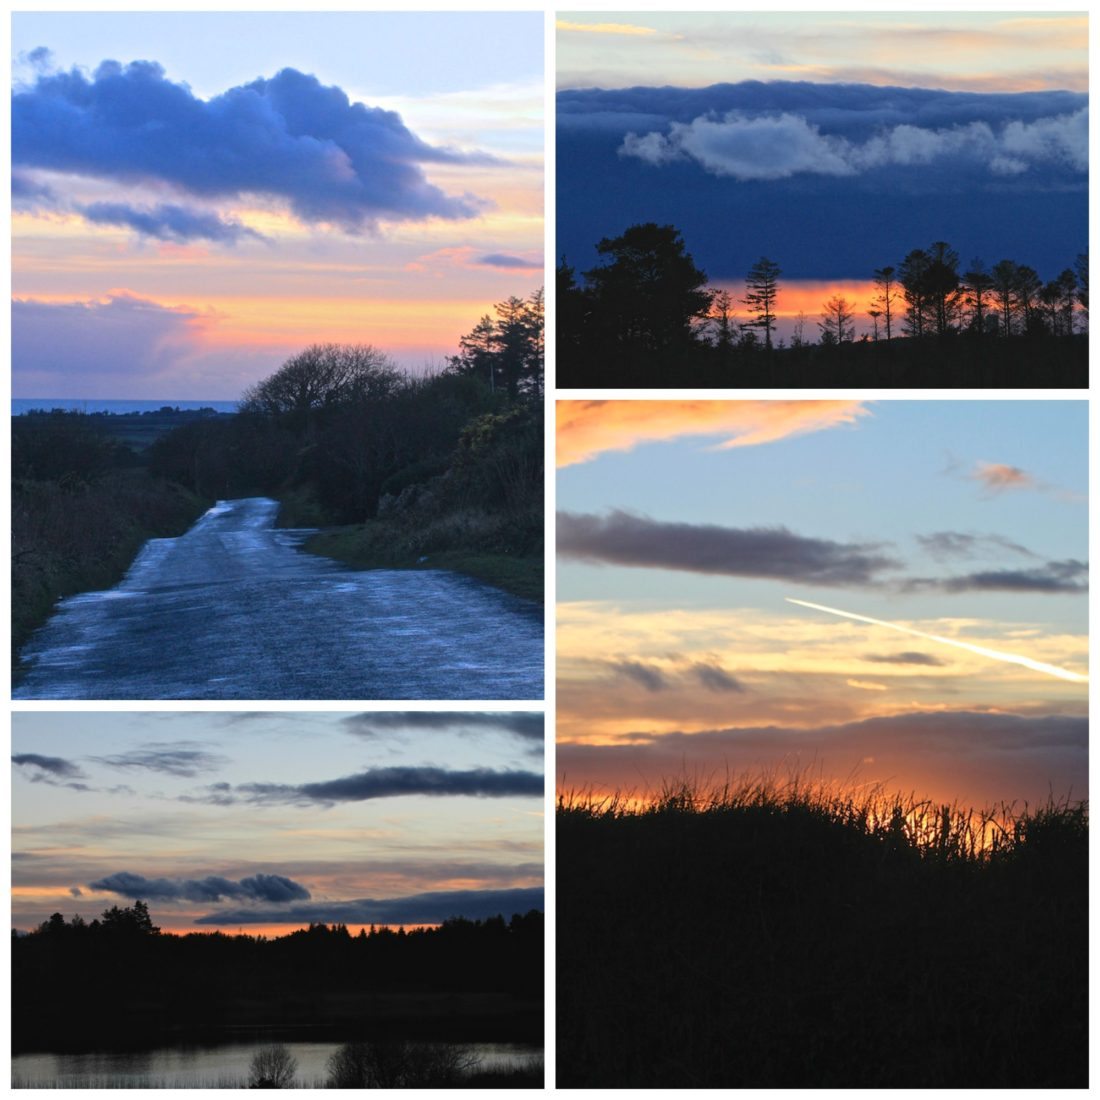 photographing-evening-skies-collage